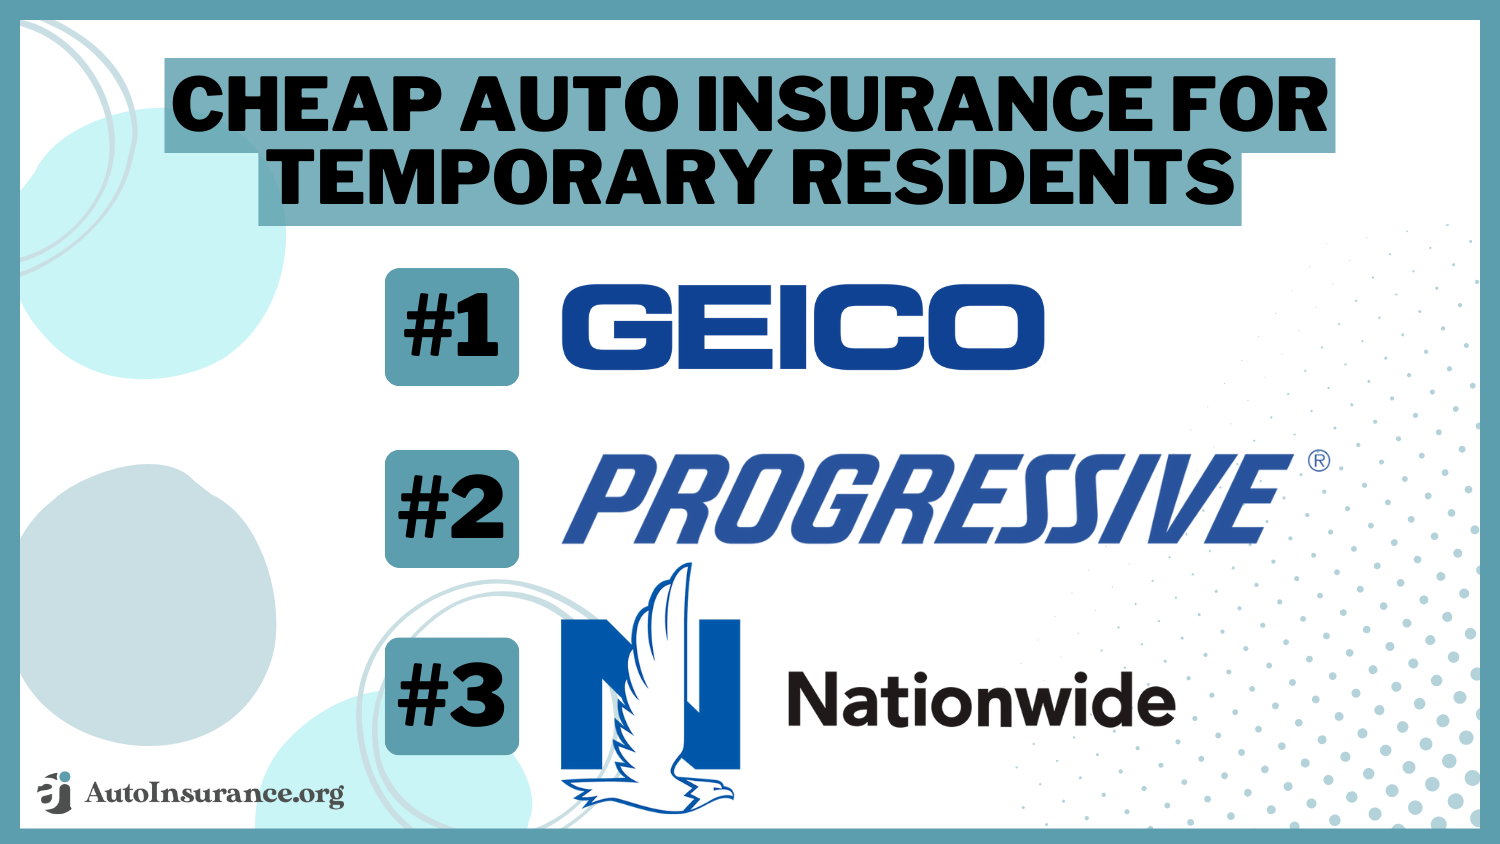 Cheap Auto Insurance for Temporary Residents - Geico, Progressive, Nationwide